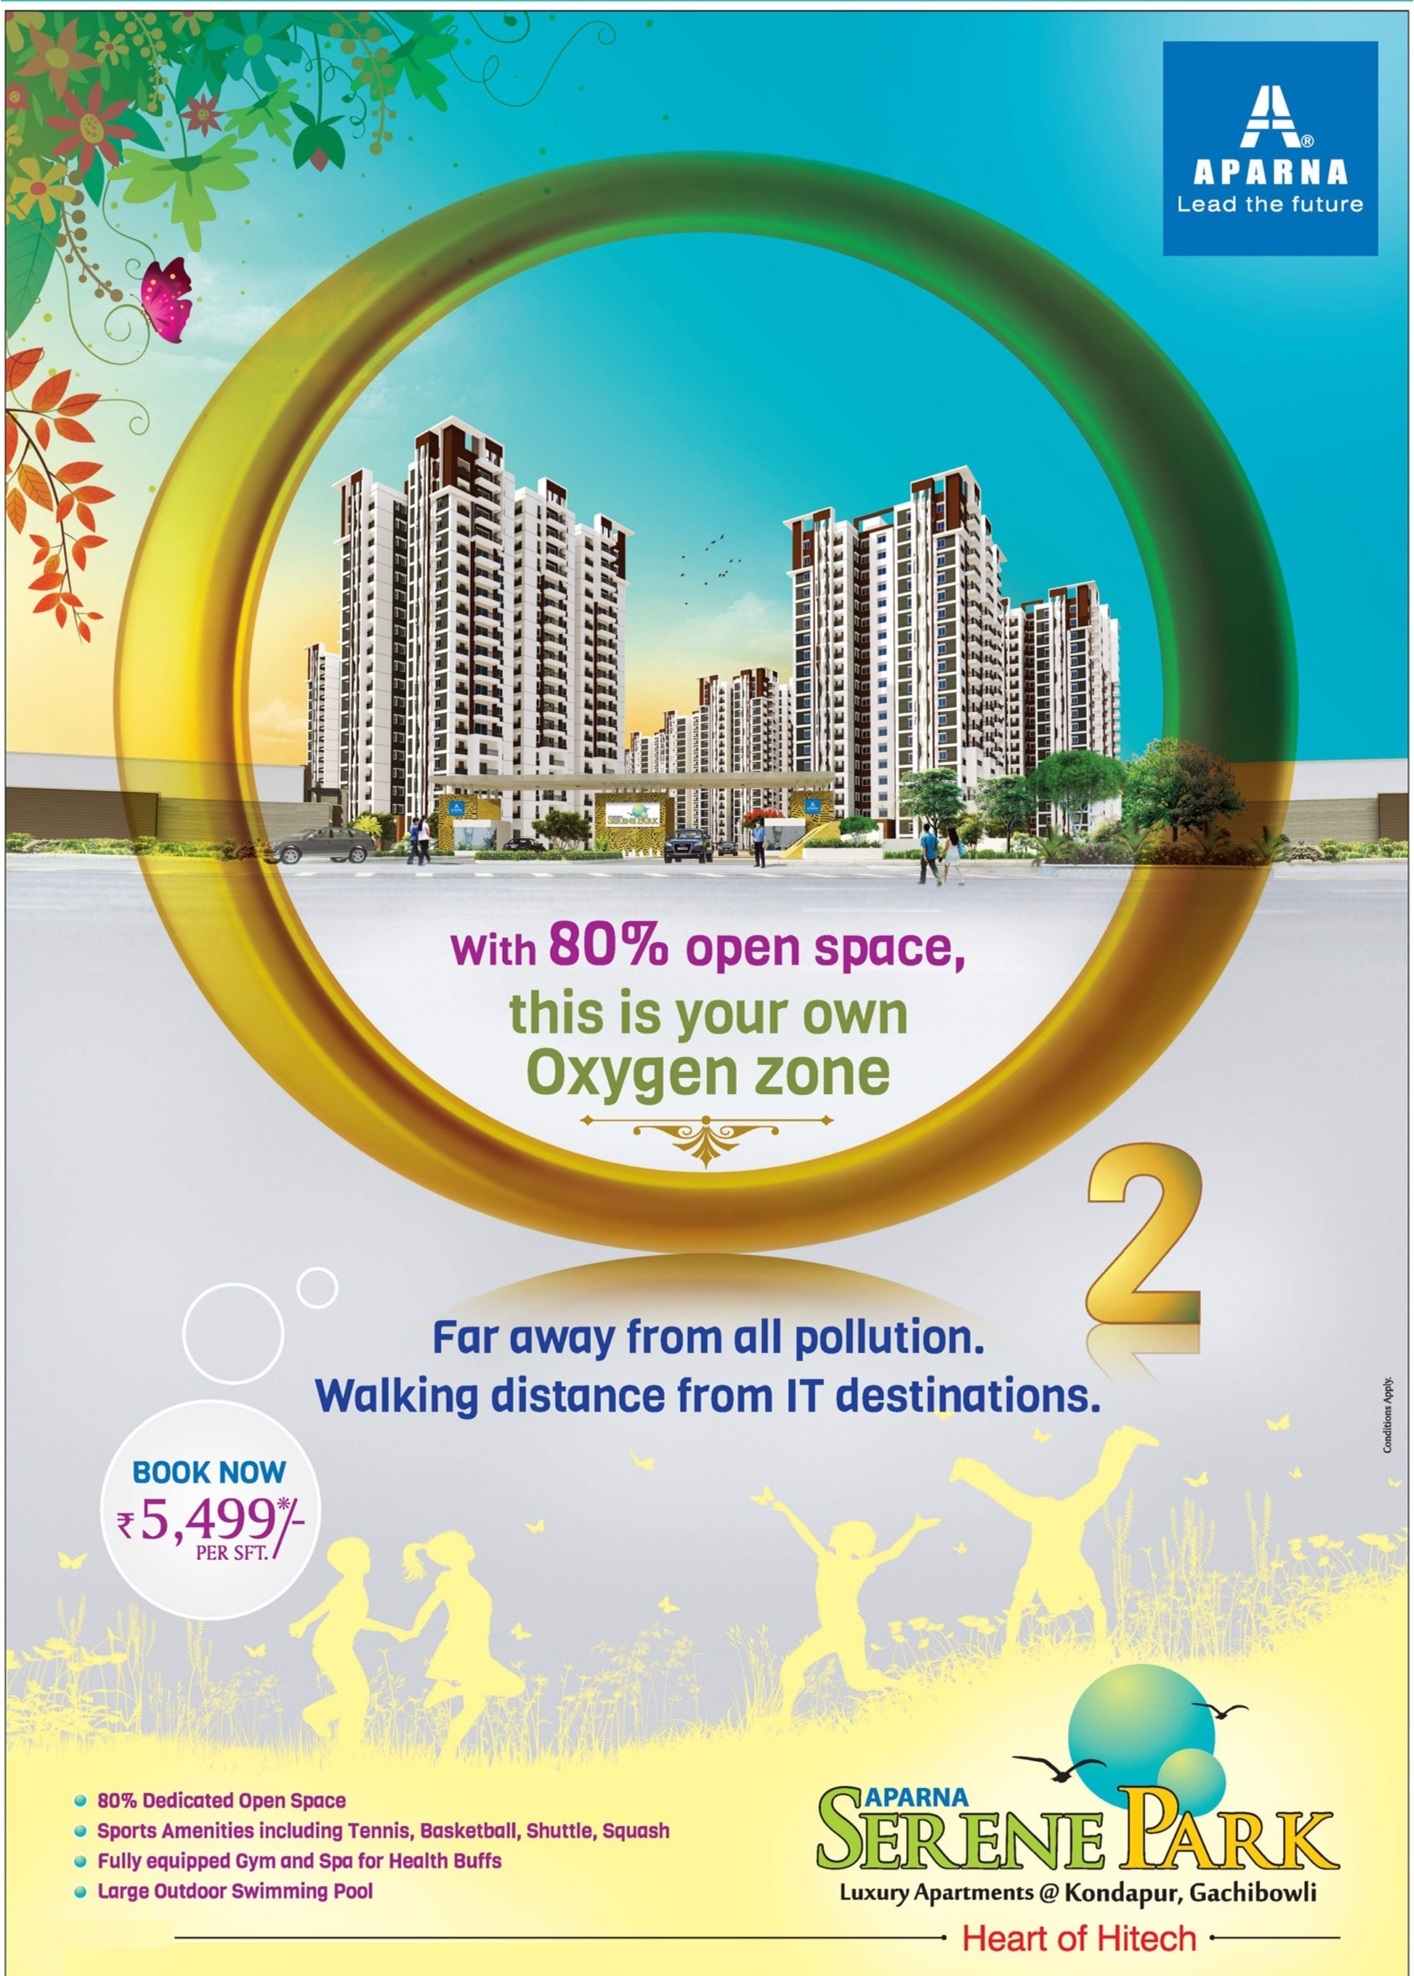 Aparna Serene Park with 80% is your own oxygen zone in Hyderabad Update